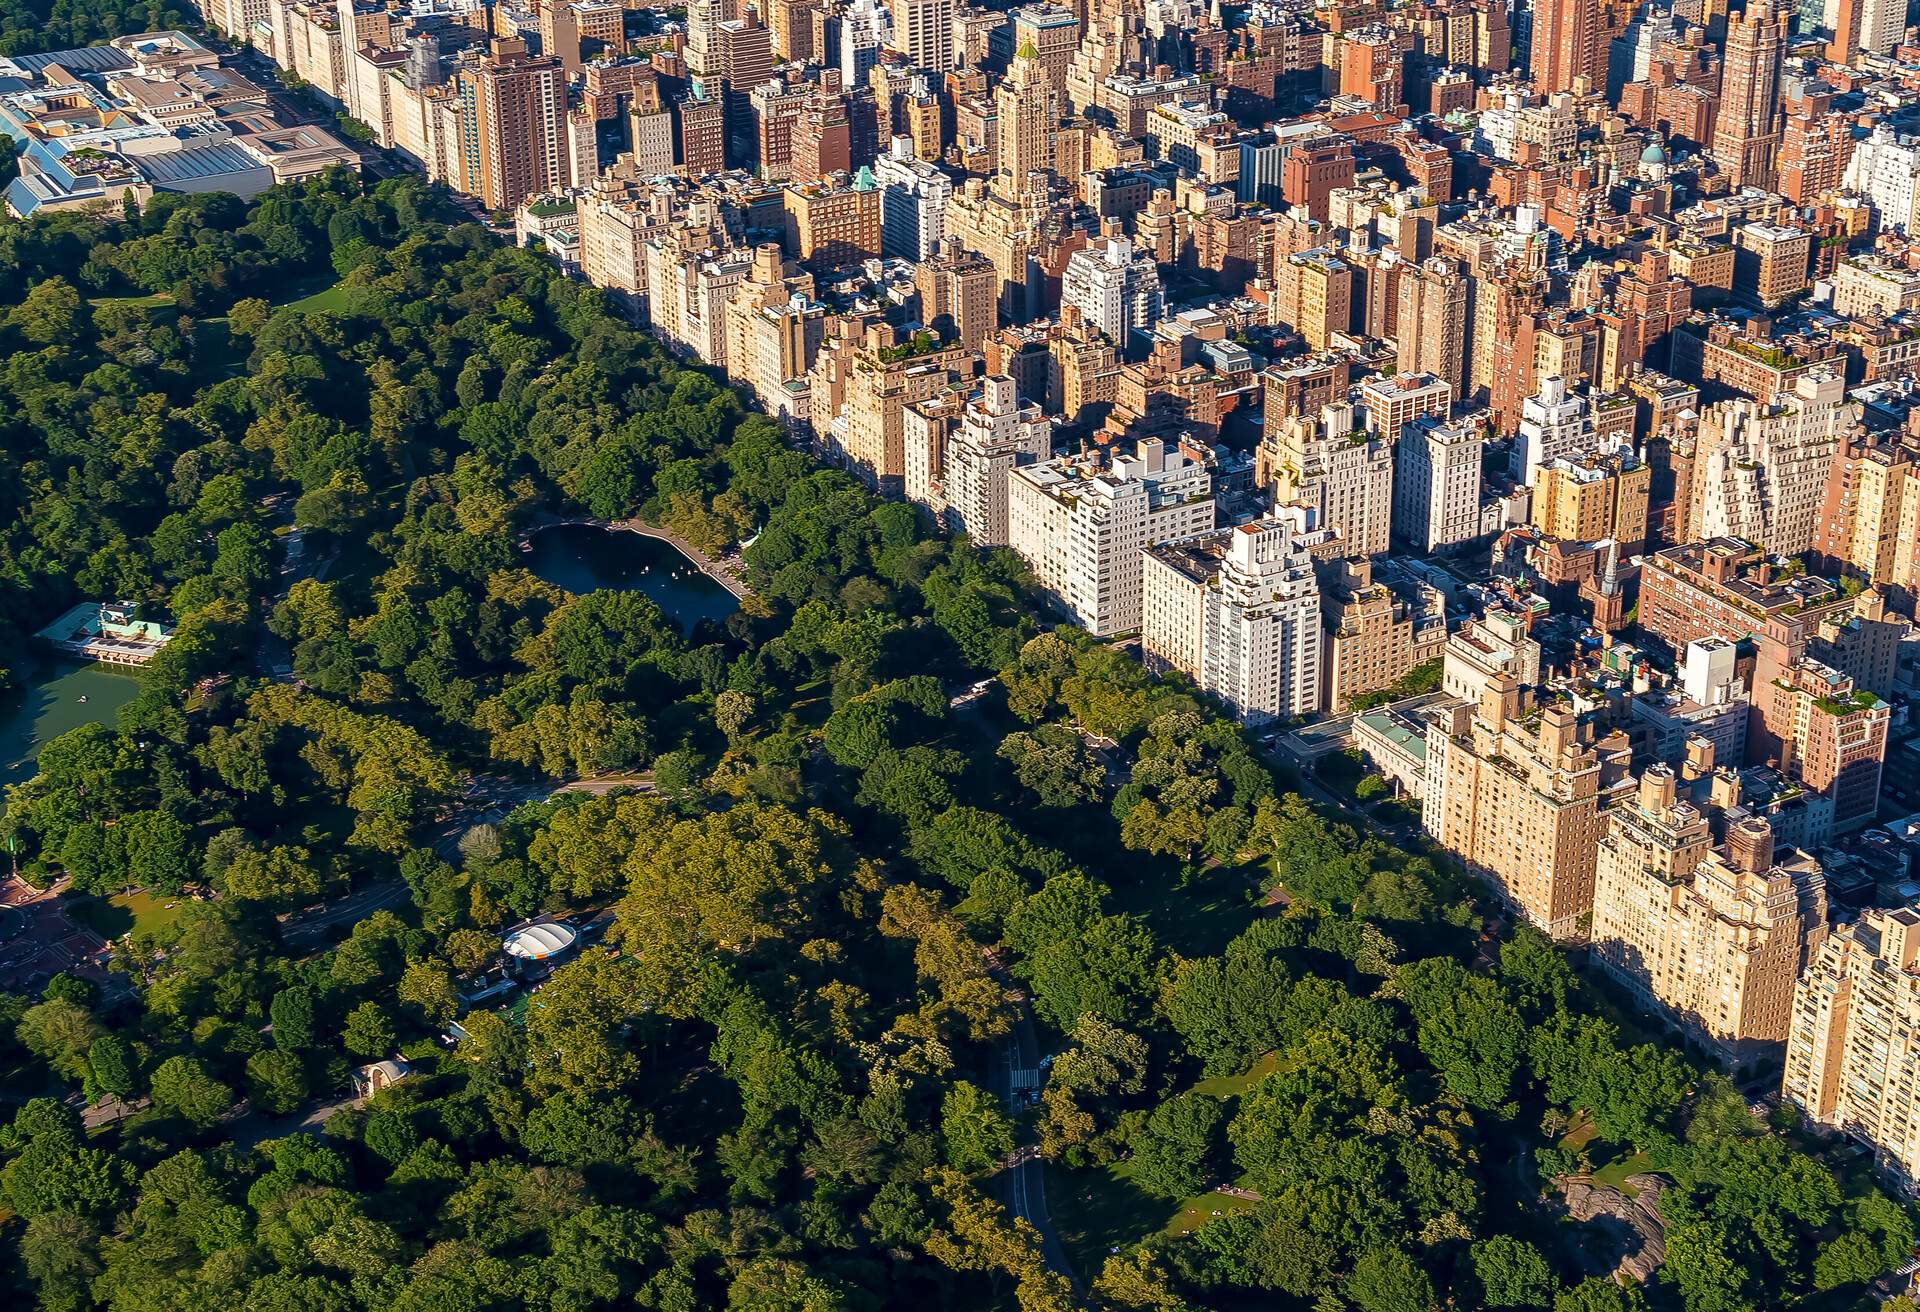 A park covered in dense forest along a cluster of city buildings.